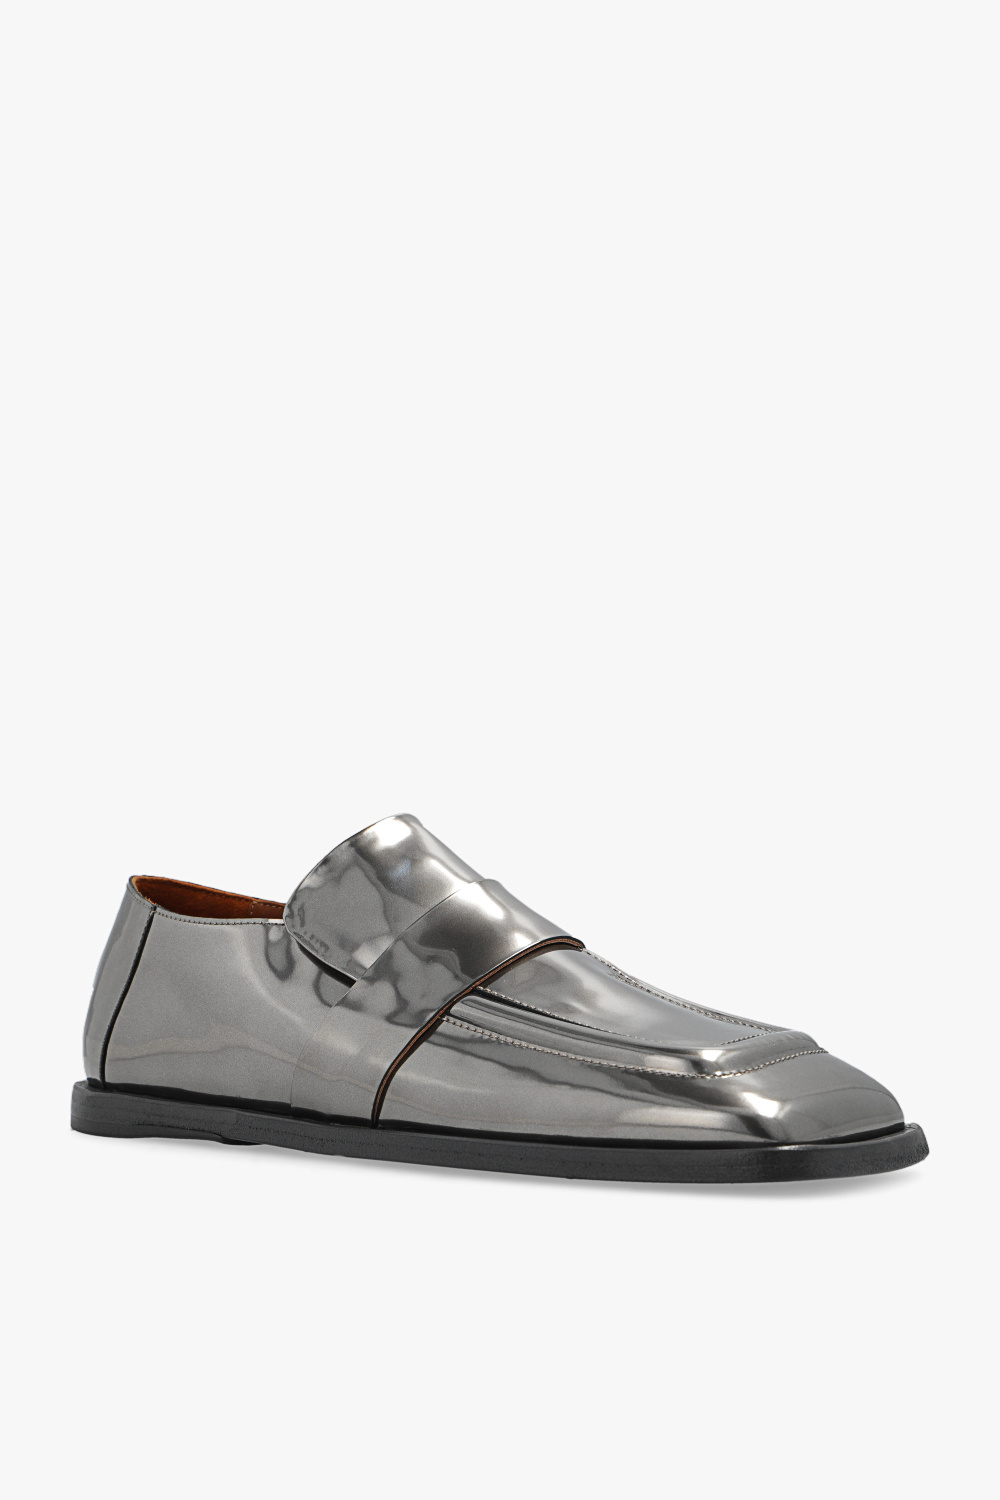 Marsell ‘Spatolo’ leather loafers